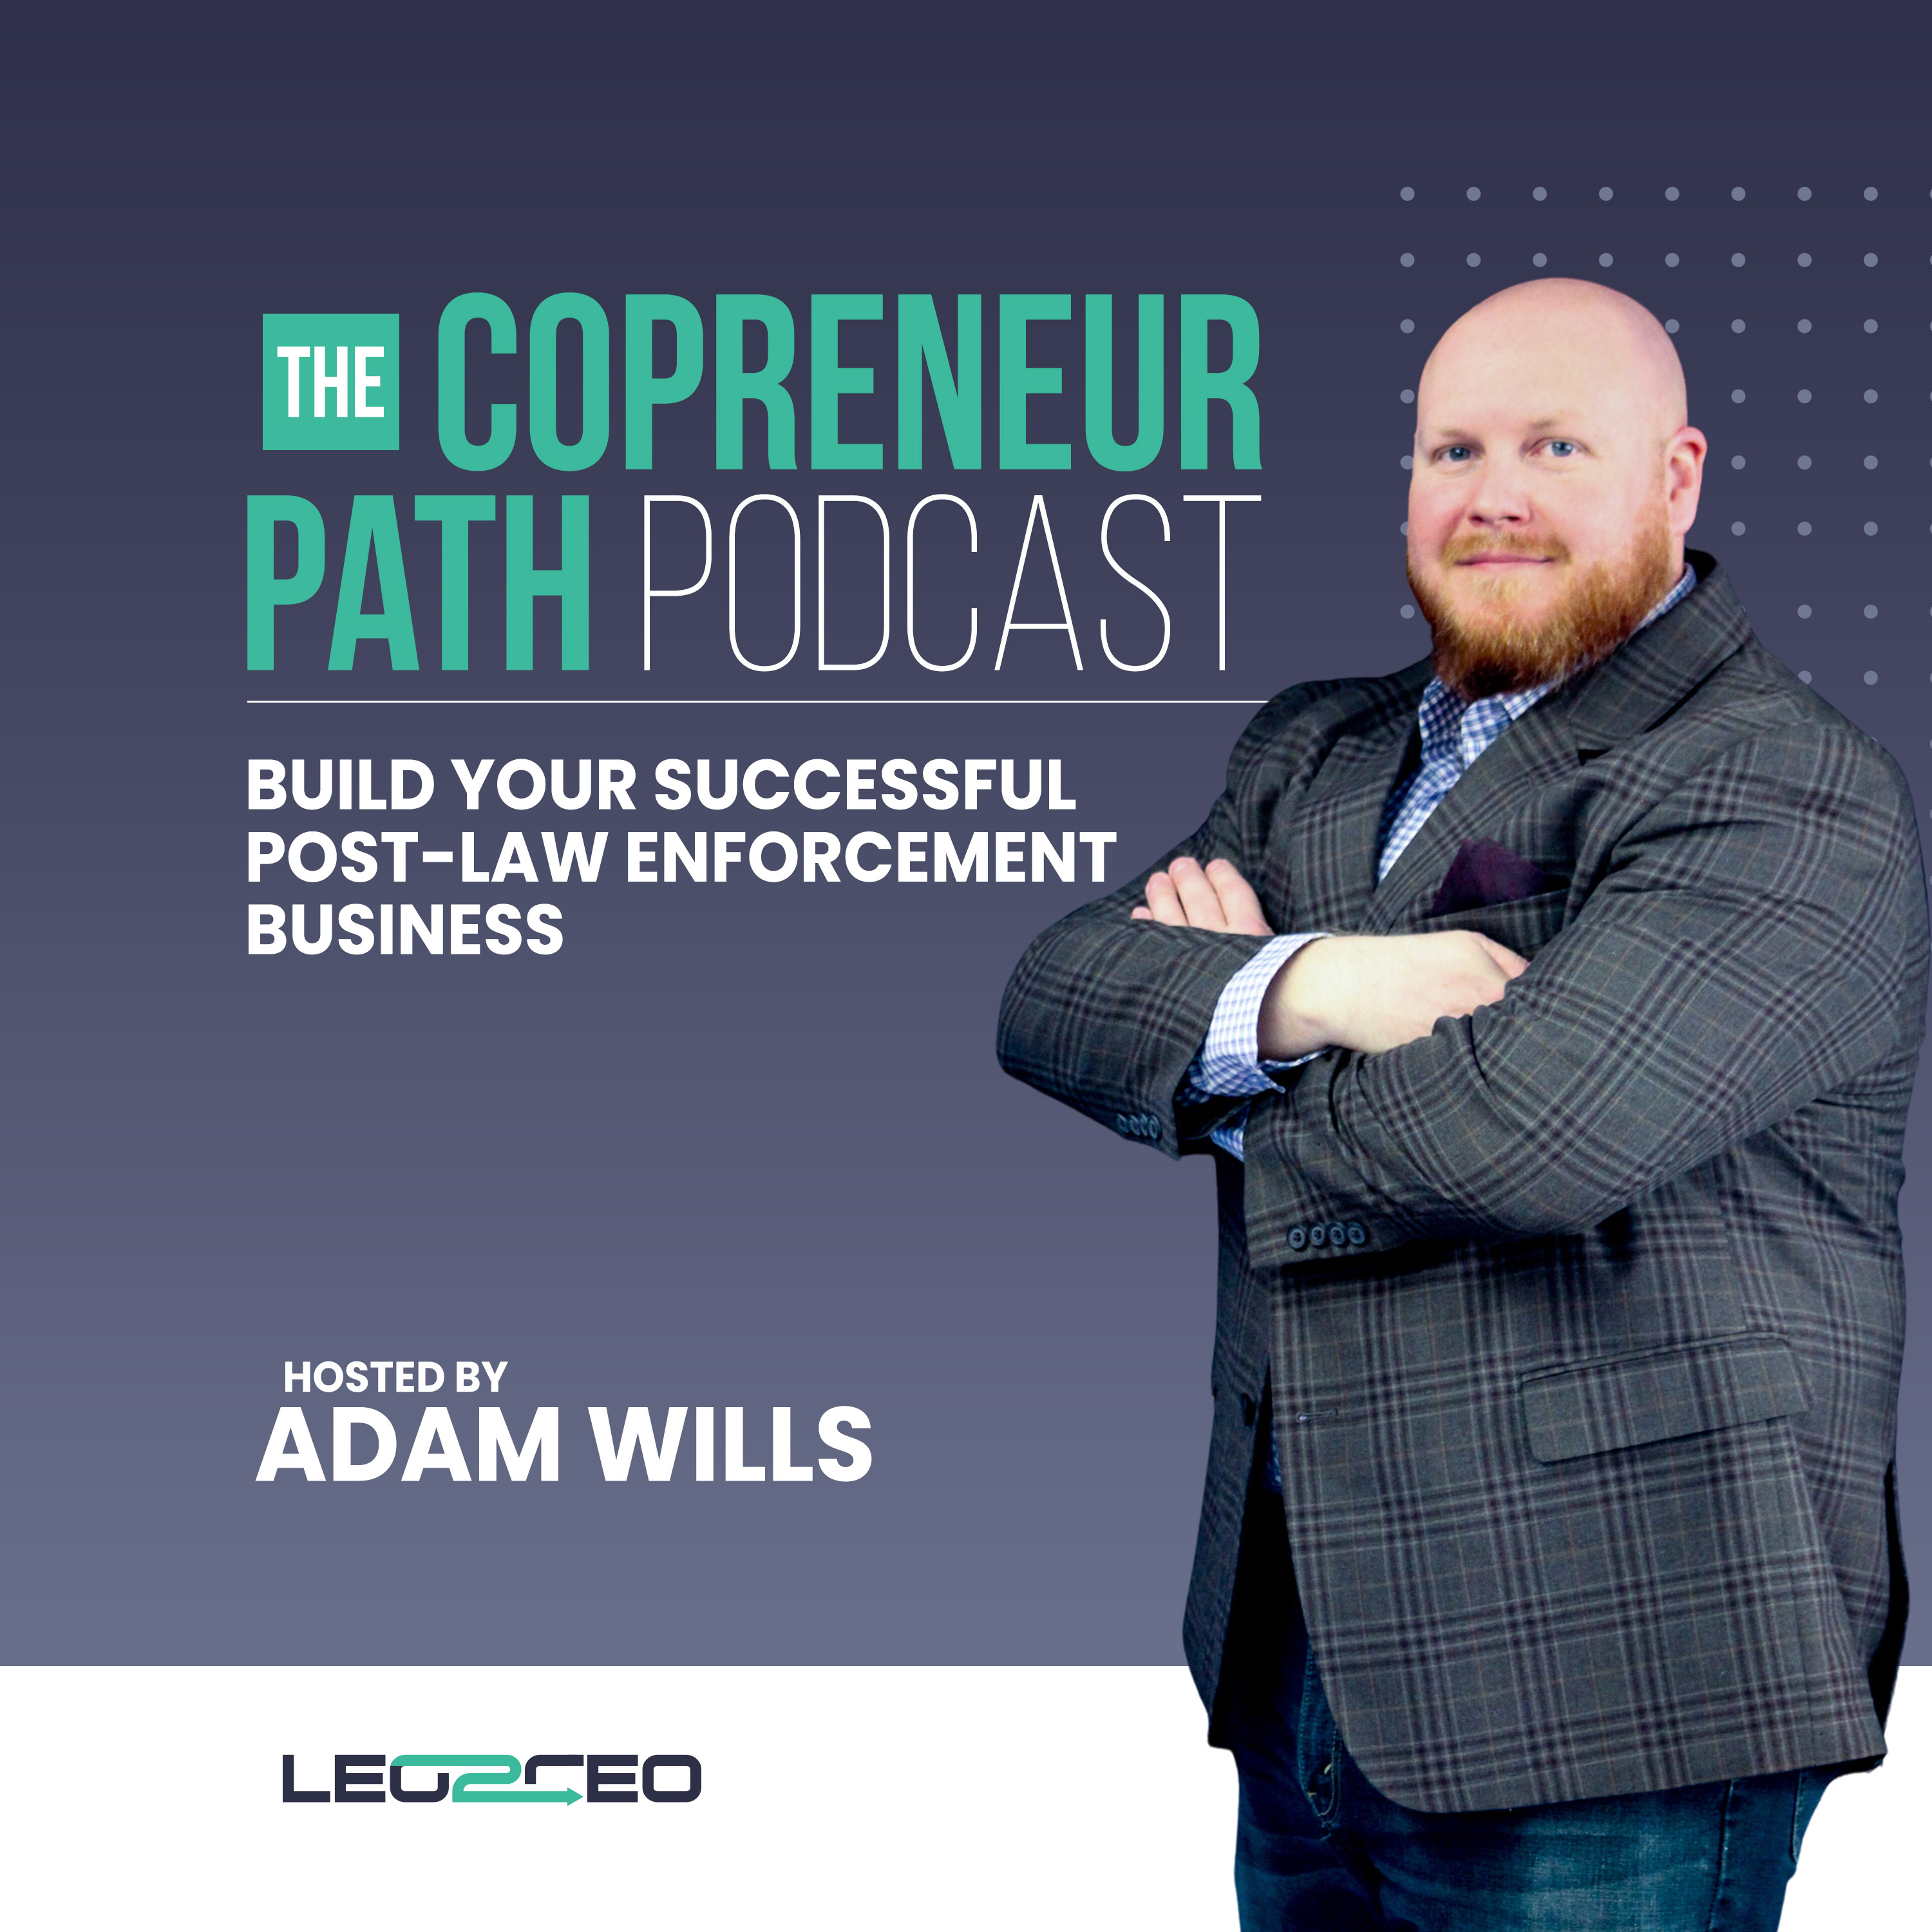 The Sheepdog COPreneur Part 1 with Lt. Col. Dave Grossman